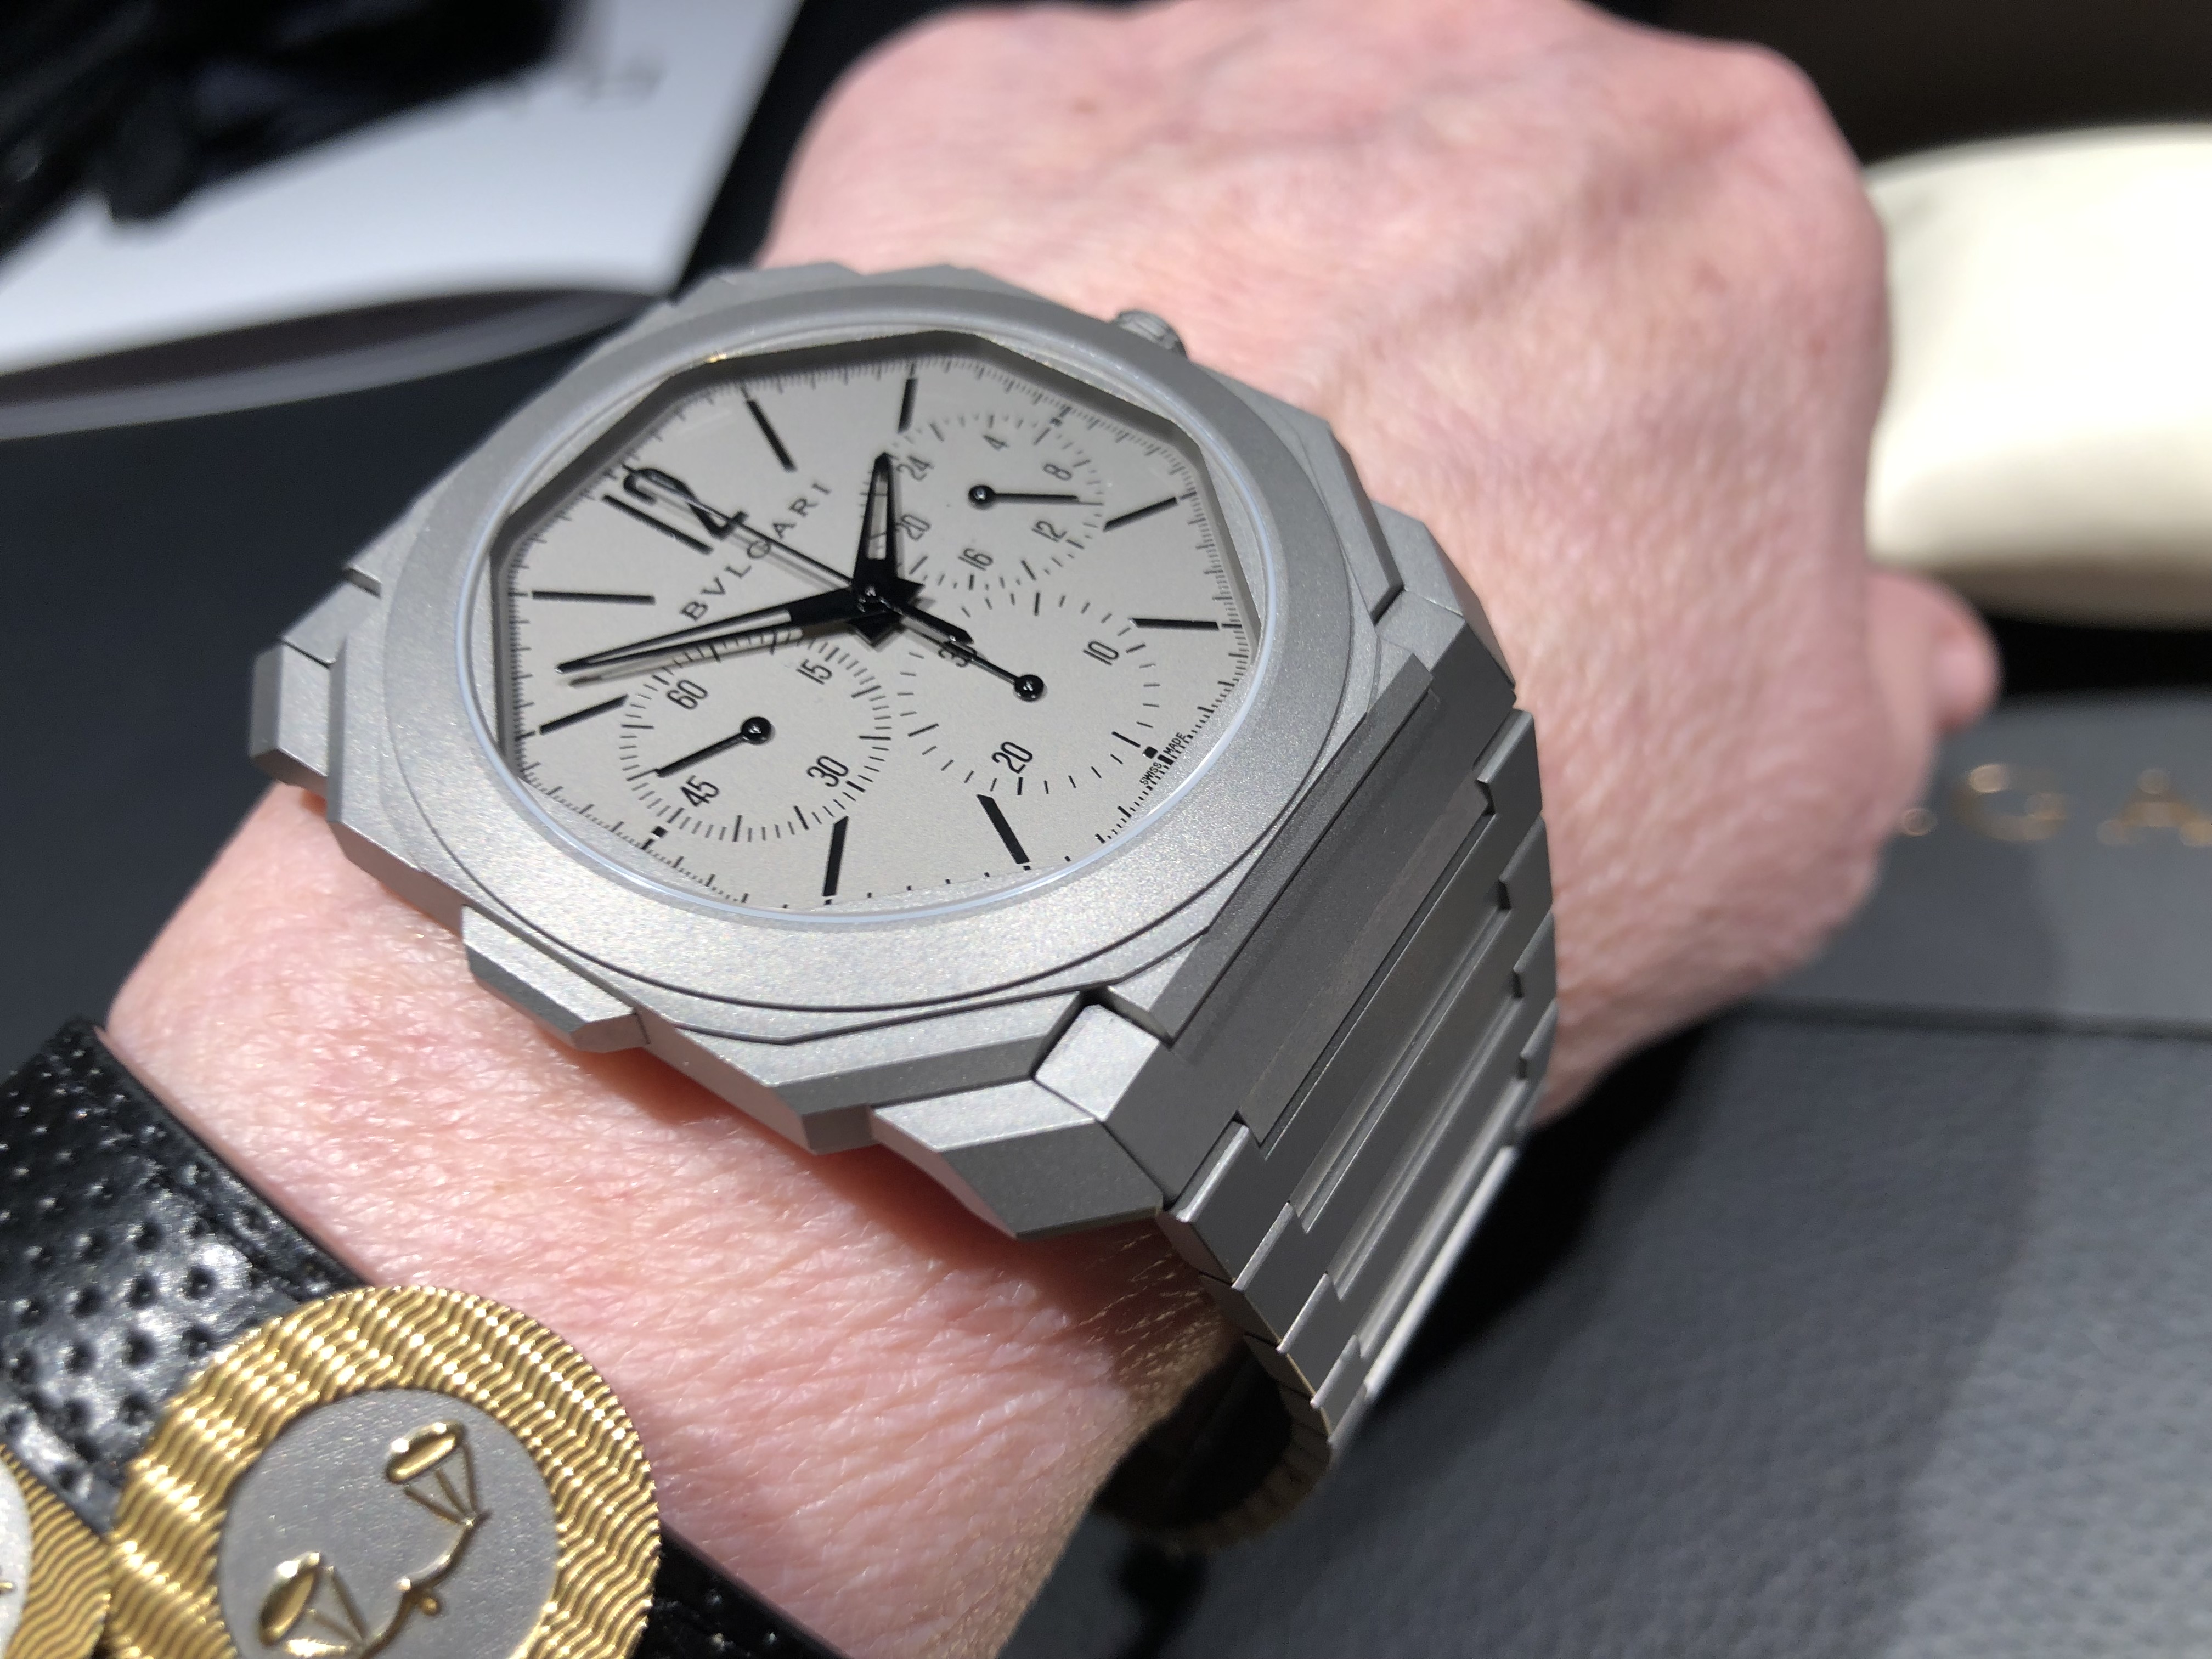 Hands On With The Bulgari Octo Finissimo Chronograph Record-Setting Watch